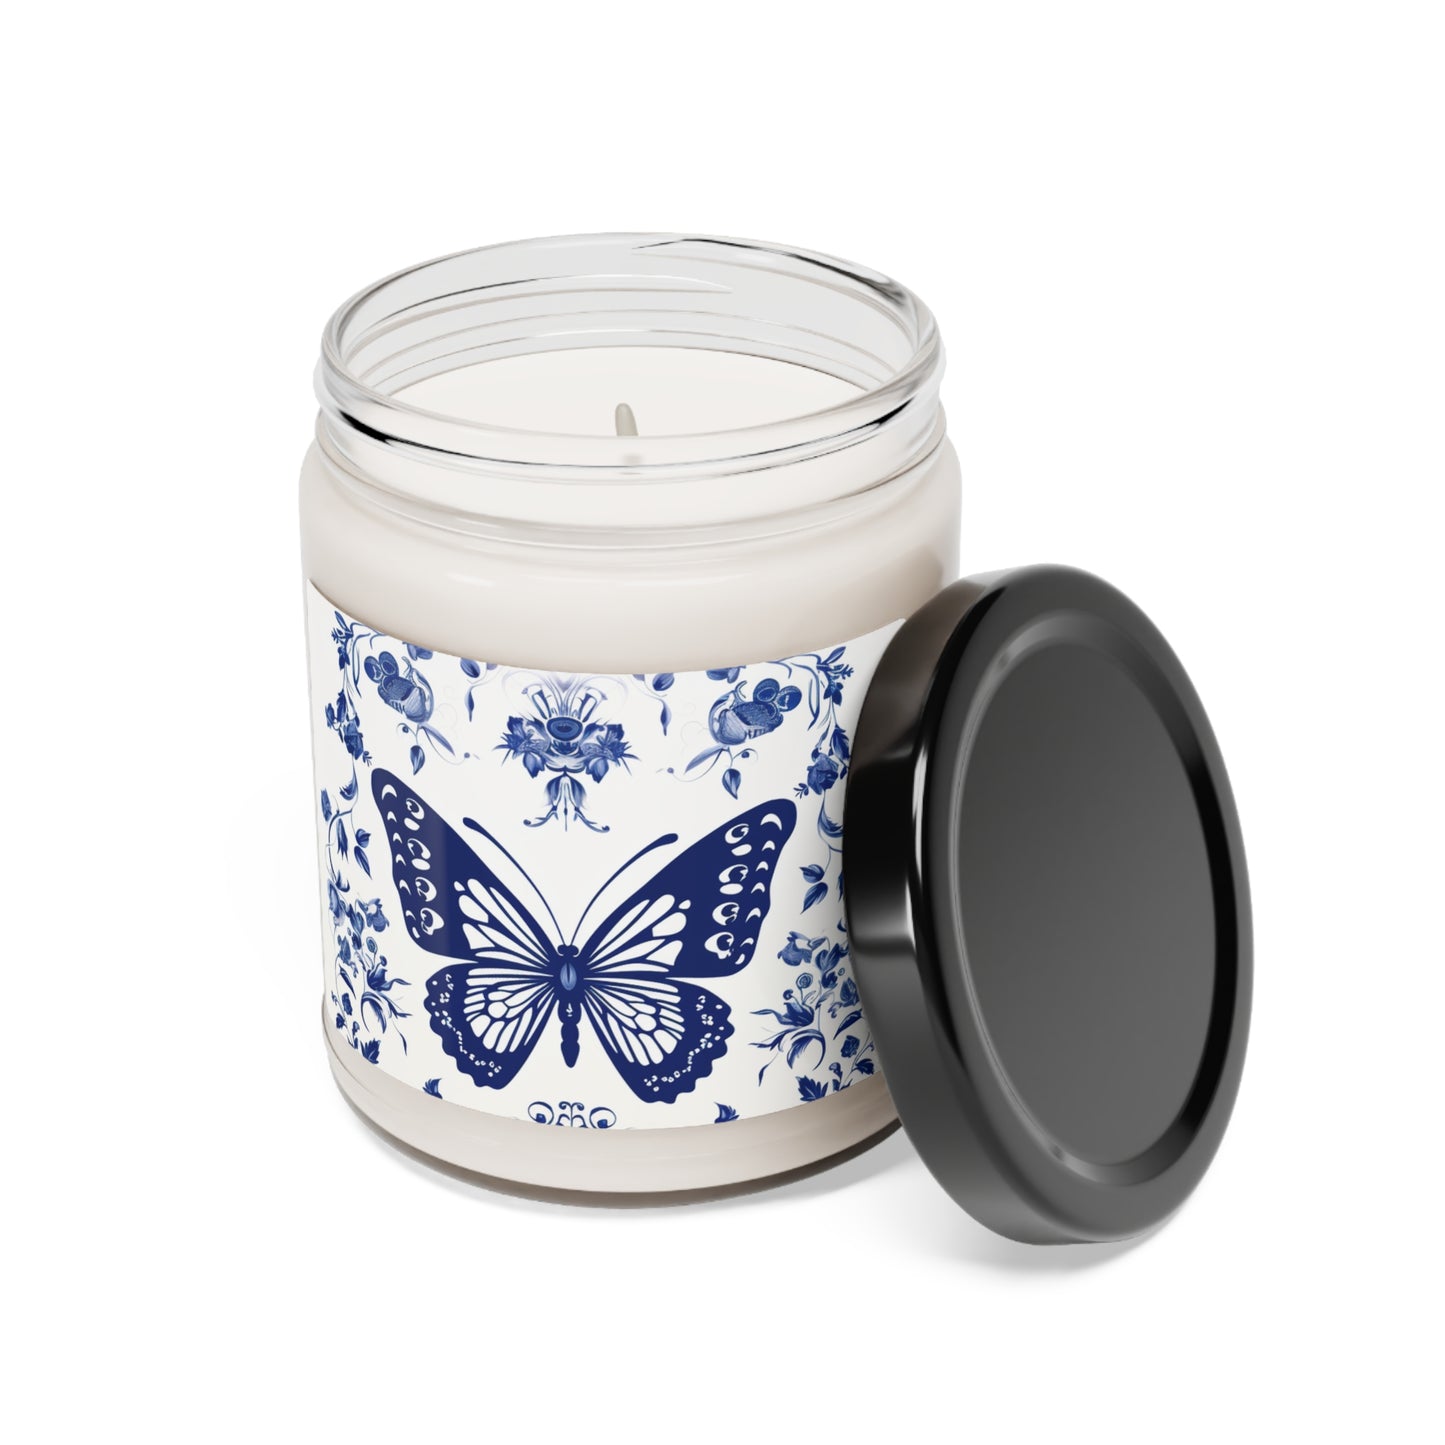 Butterfly | Scented Soy Candle, 9oz | Burning time: 50-60 hours